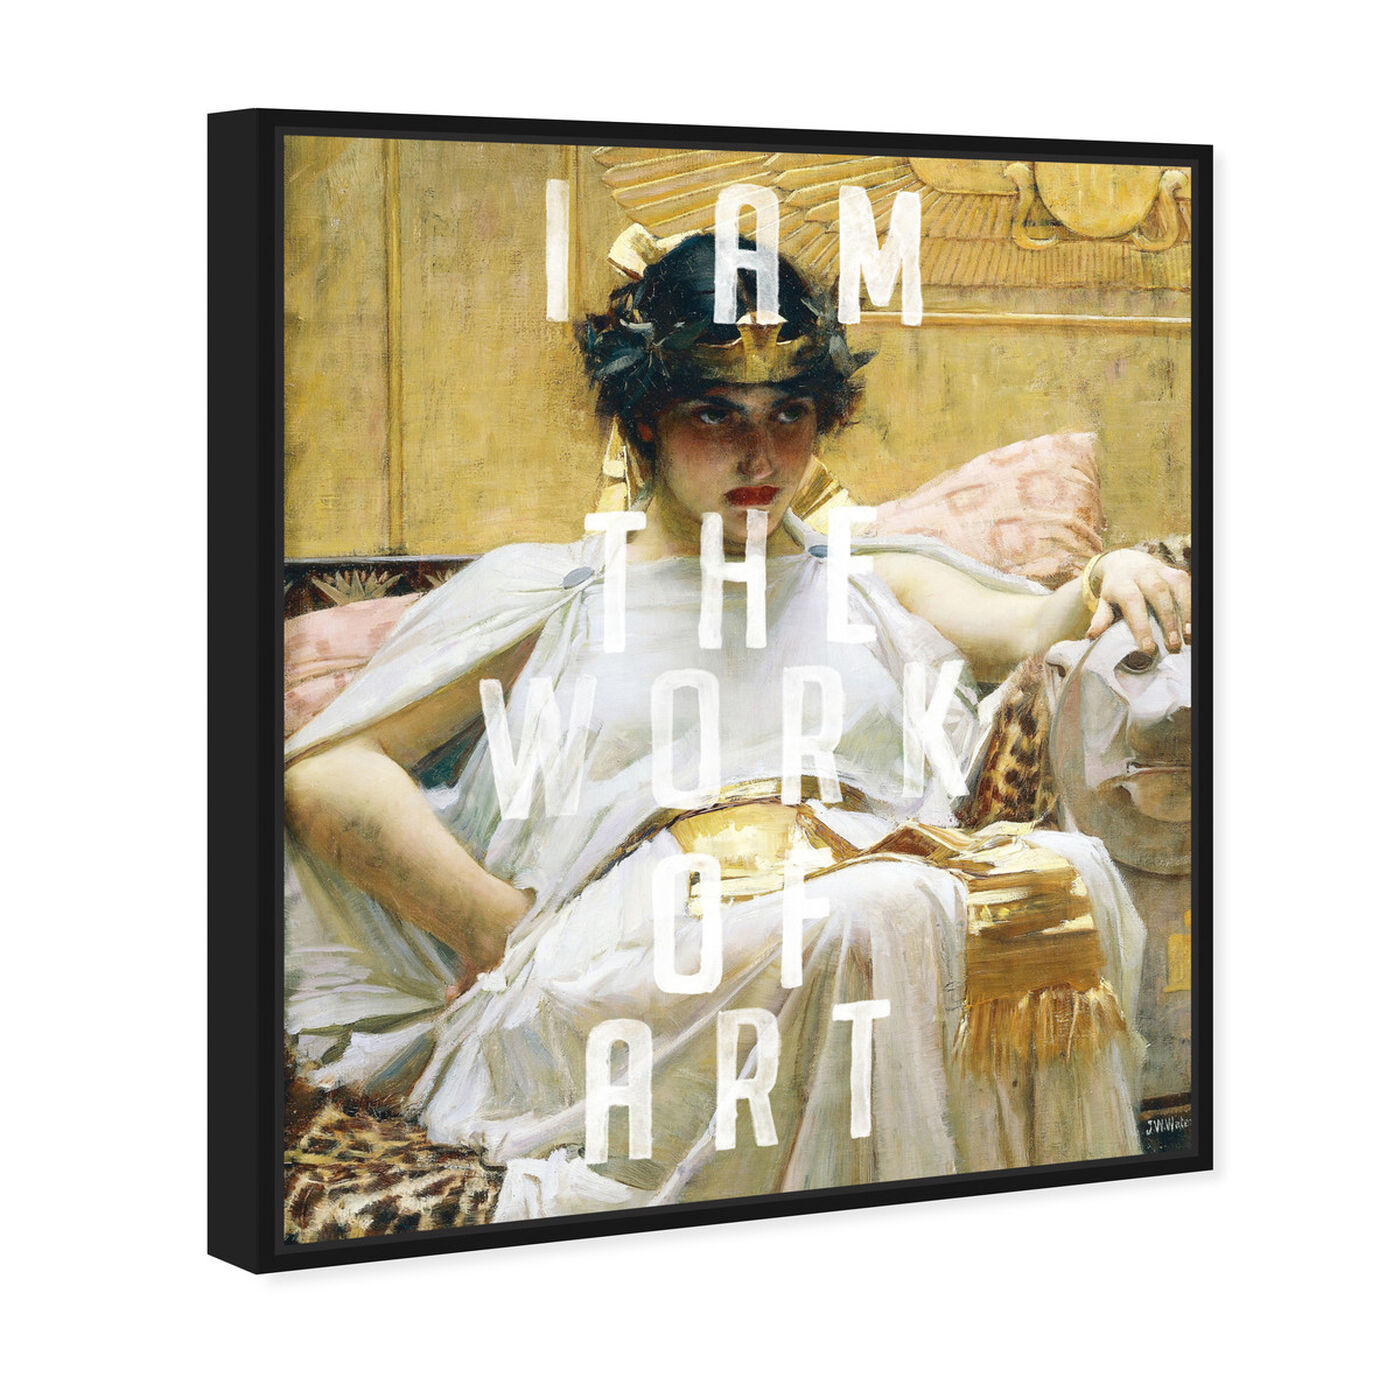 Angled view of I AM ART featuring classic and figurative and classic art.